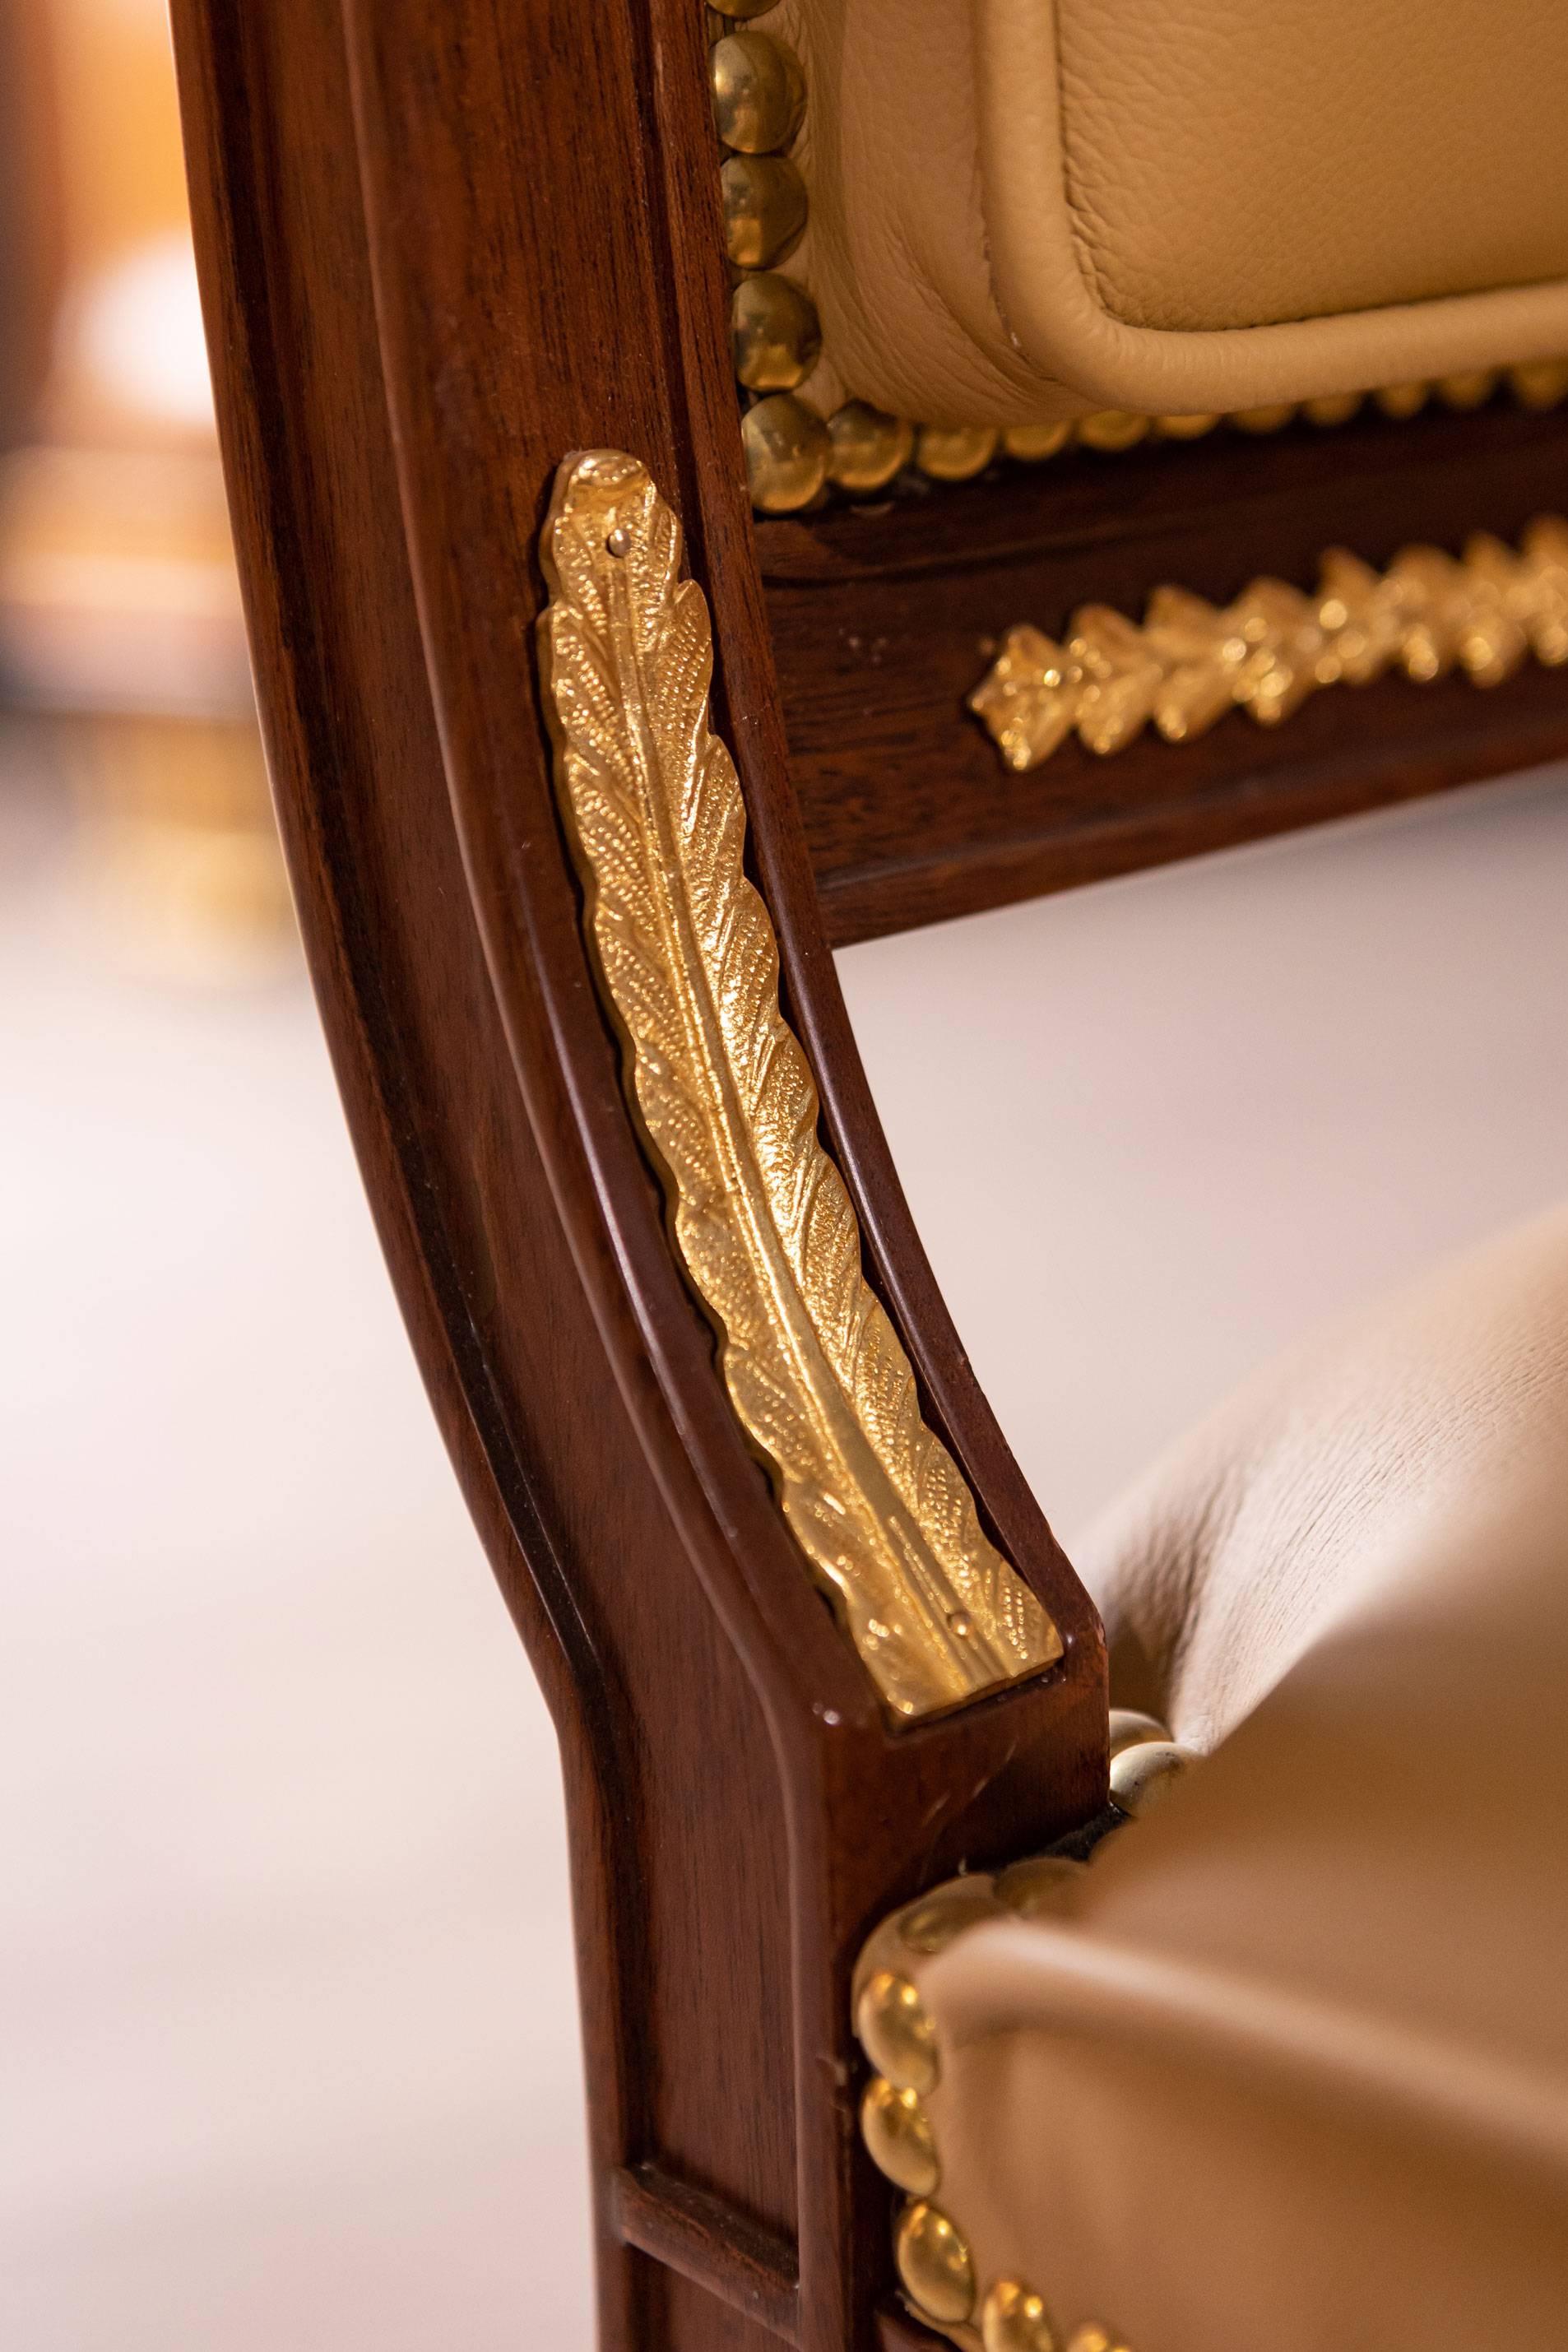 ART. 781 – The elegance of luxury classic Chairs made in Italy by C.G. Capelletti.